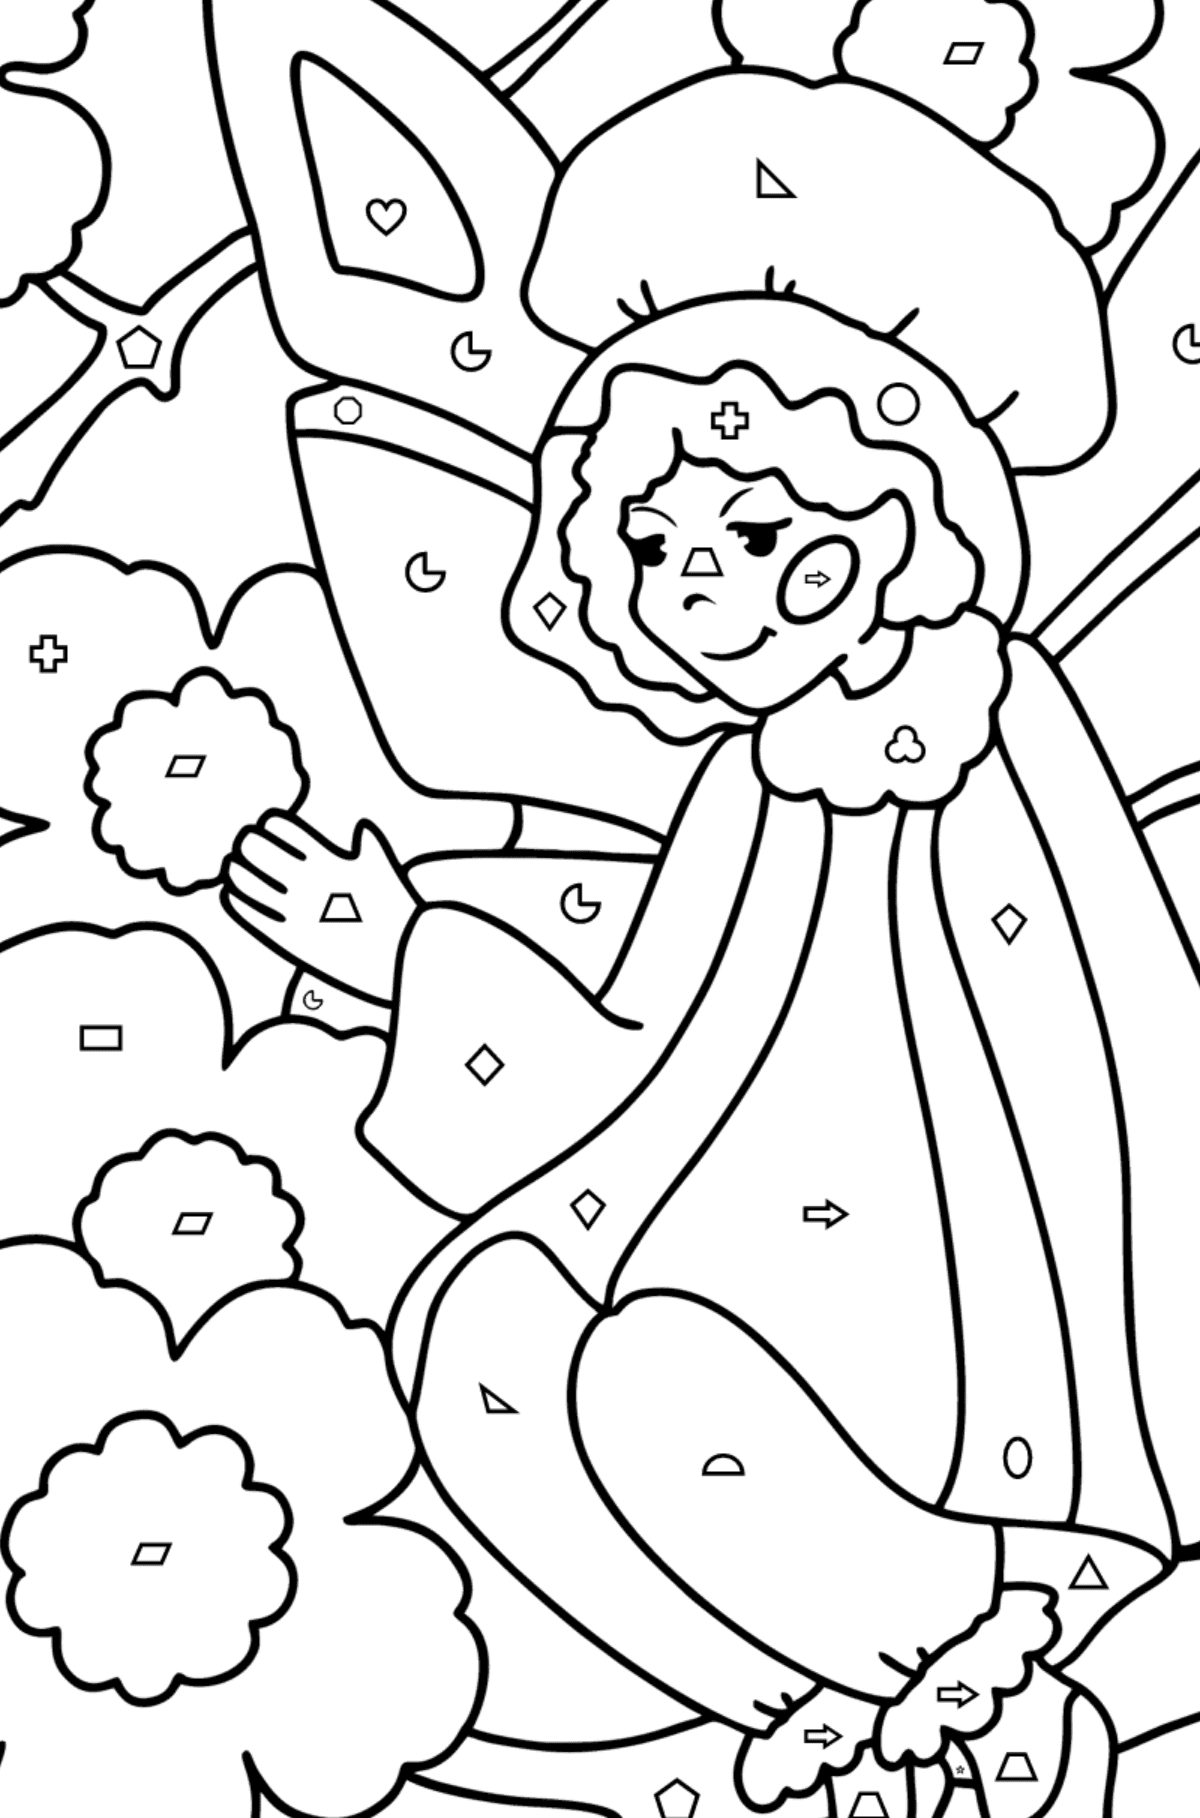 Fairy on a flower coloring page - Coloring by Geometric Shapes for Kids